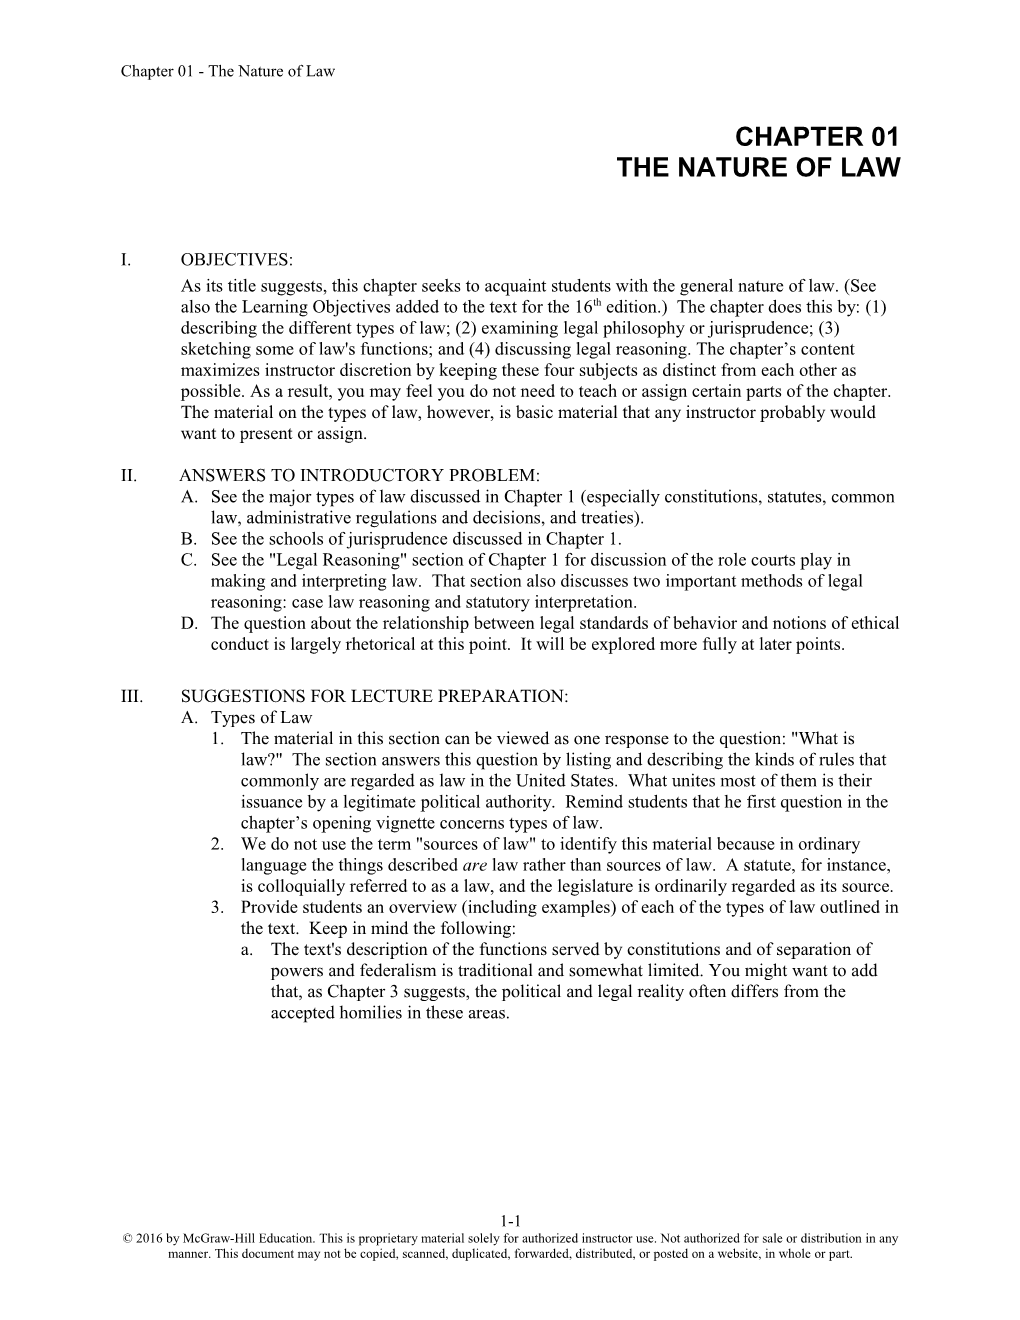 Chapter 01 - the Nature of Law